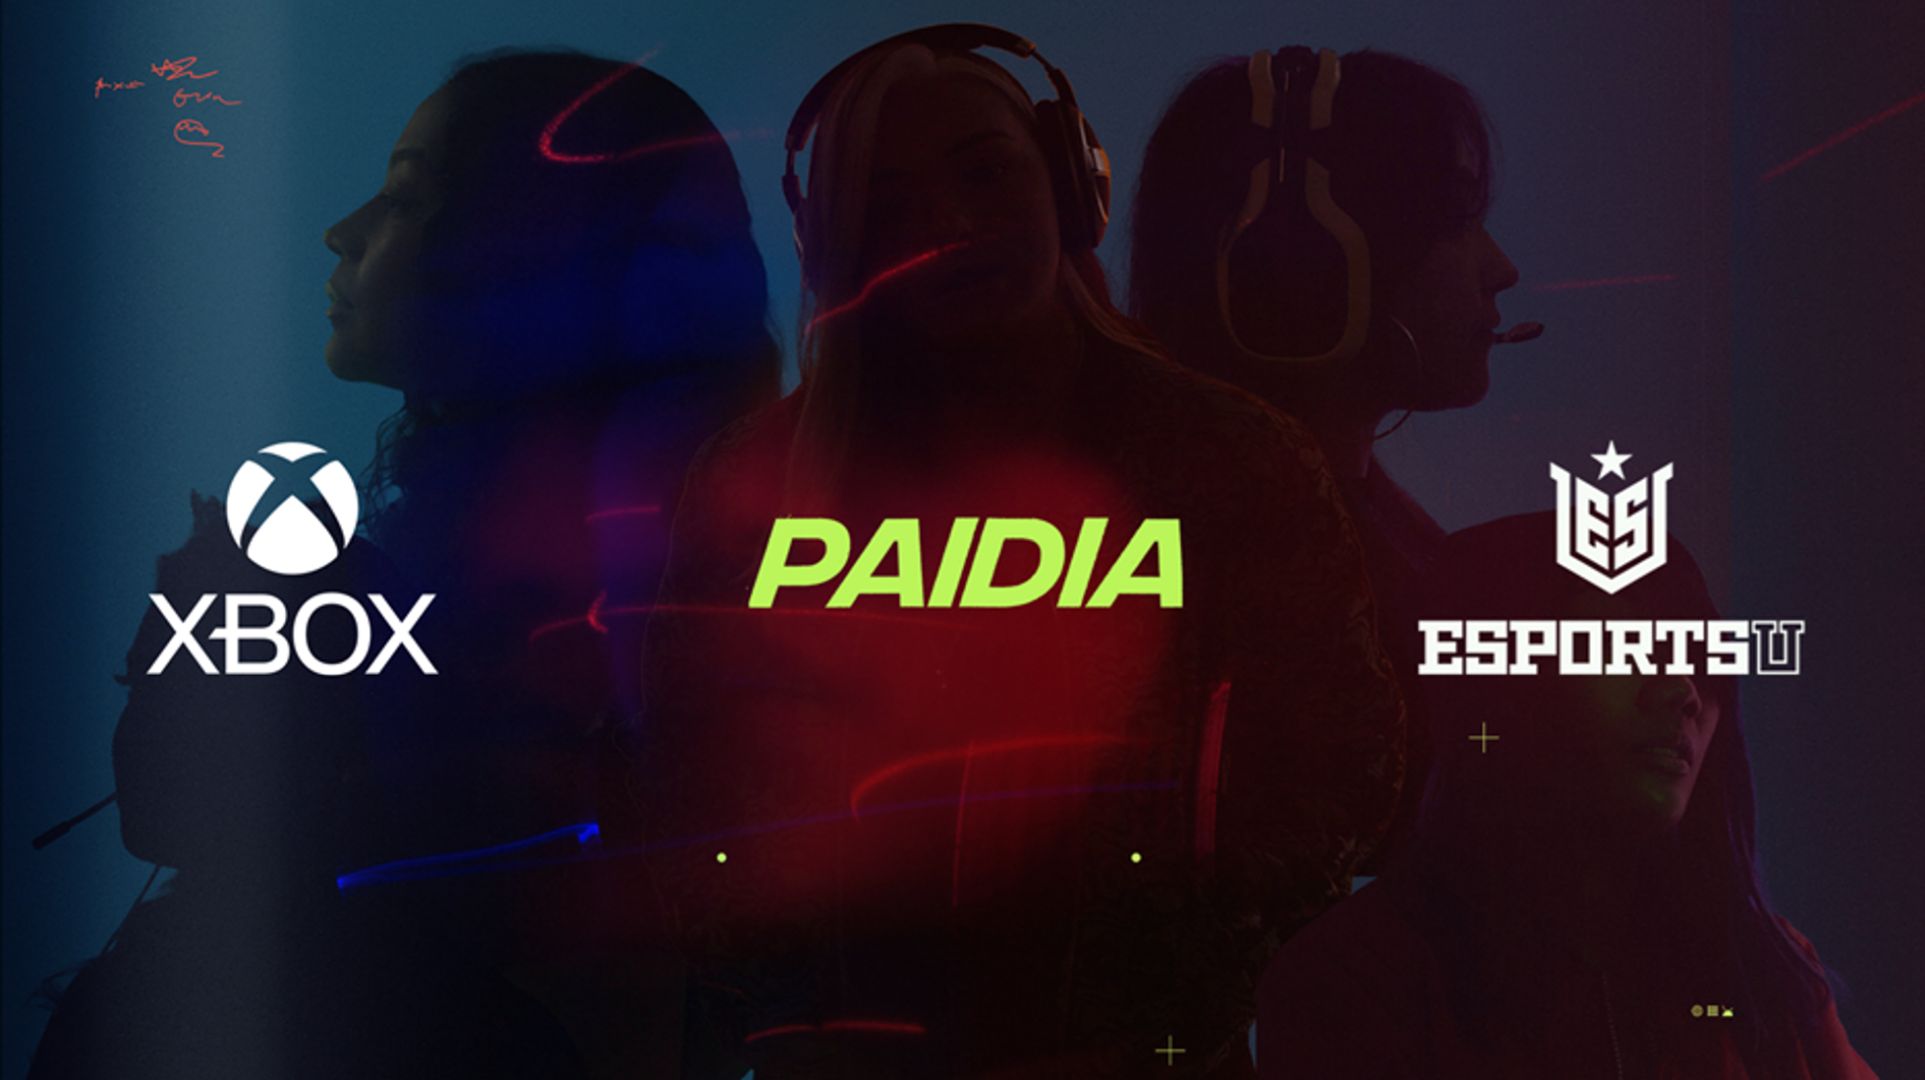 Xbox, Paidia, and EsportsU logos over image of five women gamers signifying partnership to empower and amplify opportunities for women in gaming.